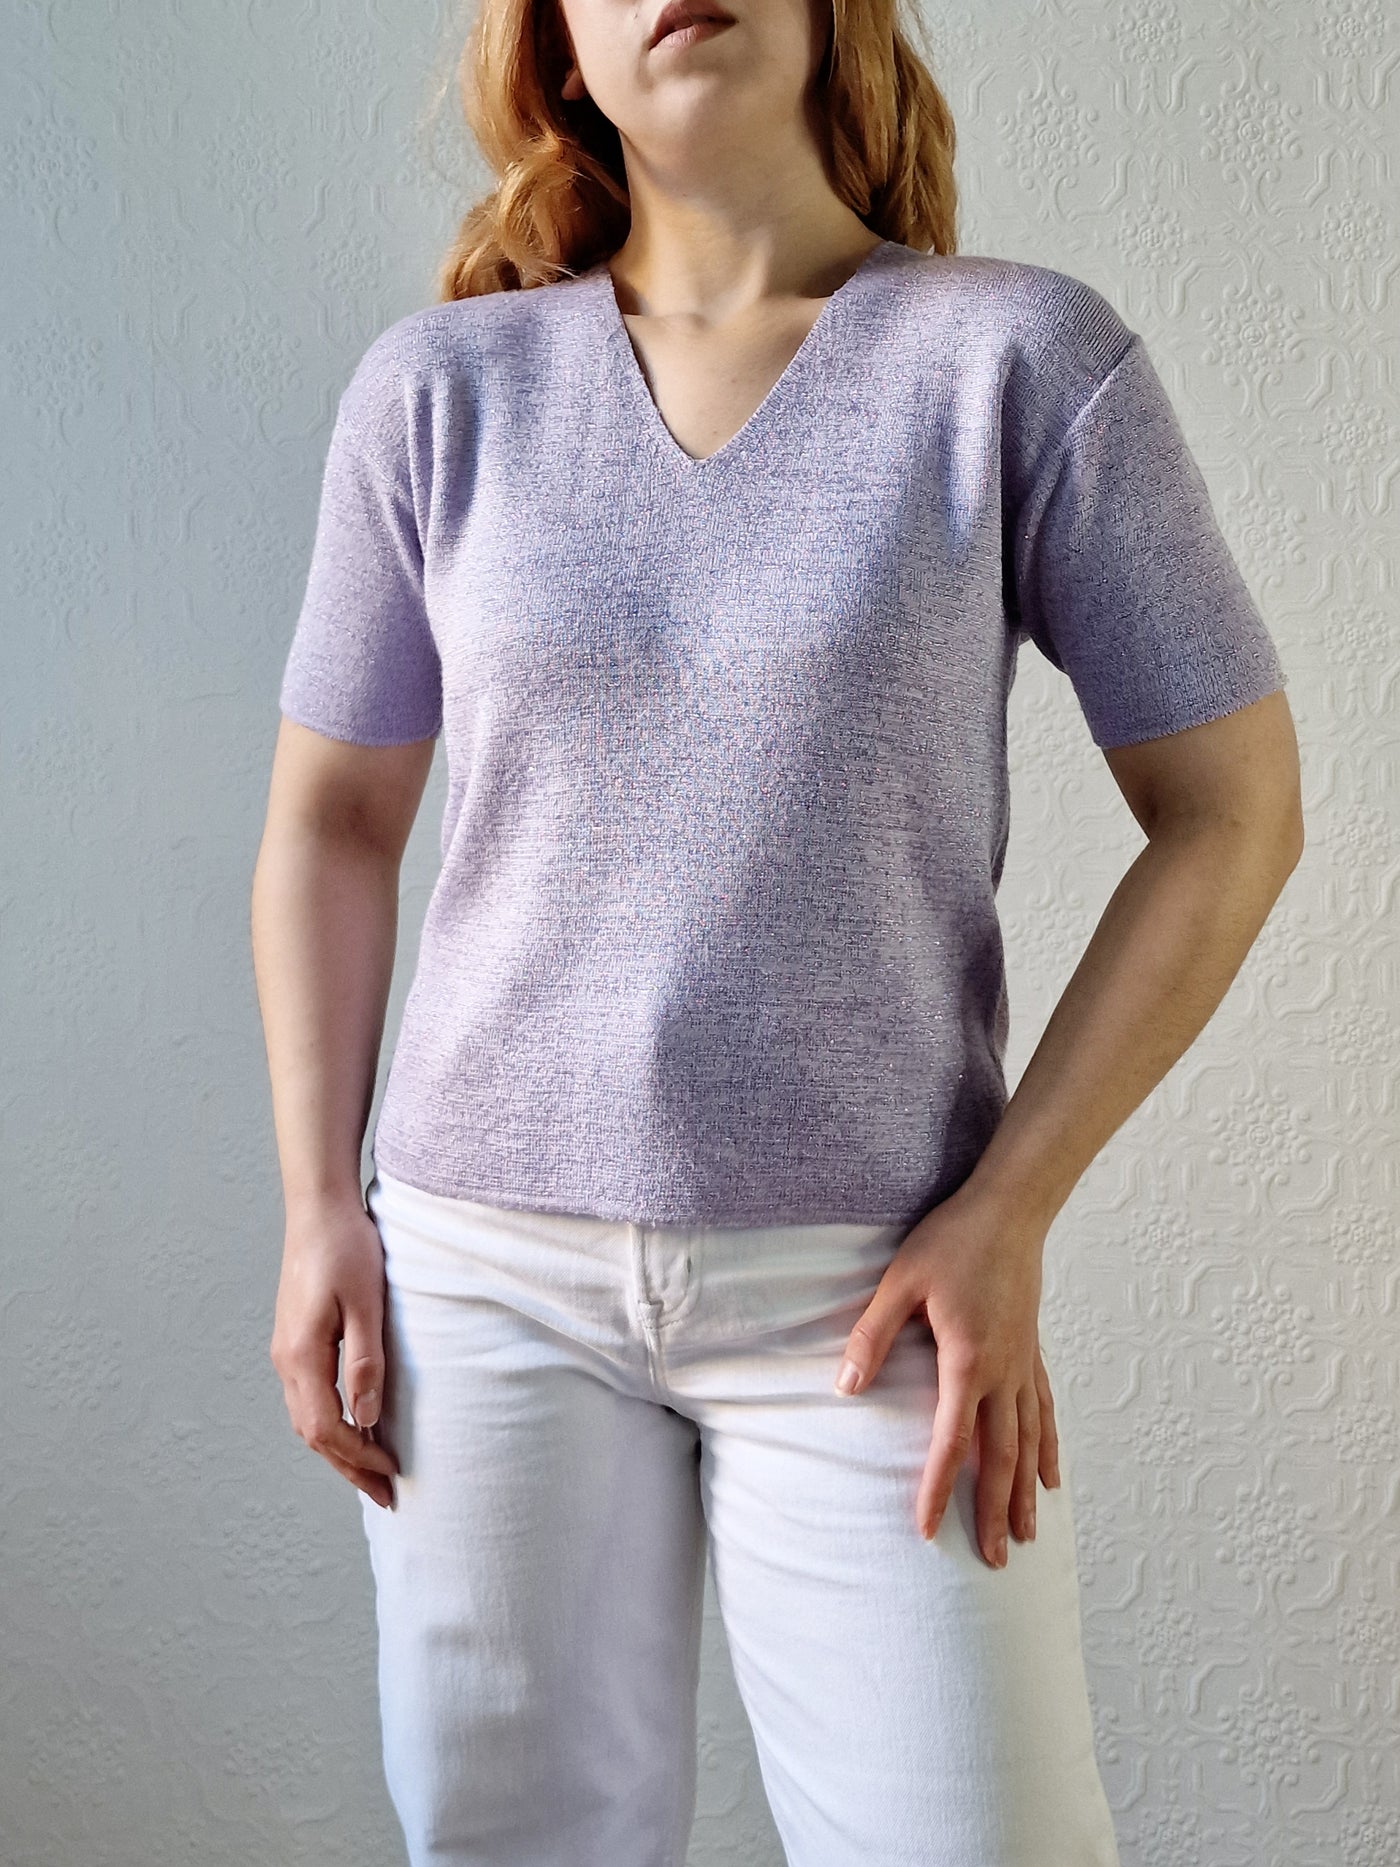 Vintage 90s Lilac Purple V-Neck Knitted Lurex Top with Short Sleeves - S/M